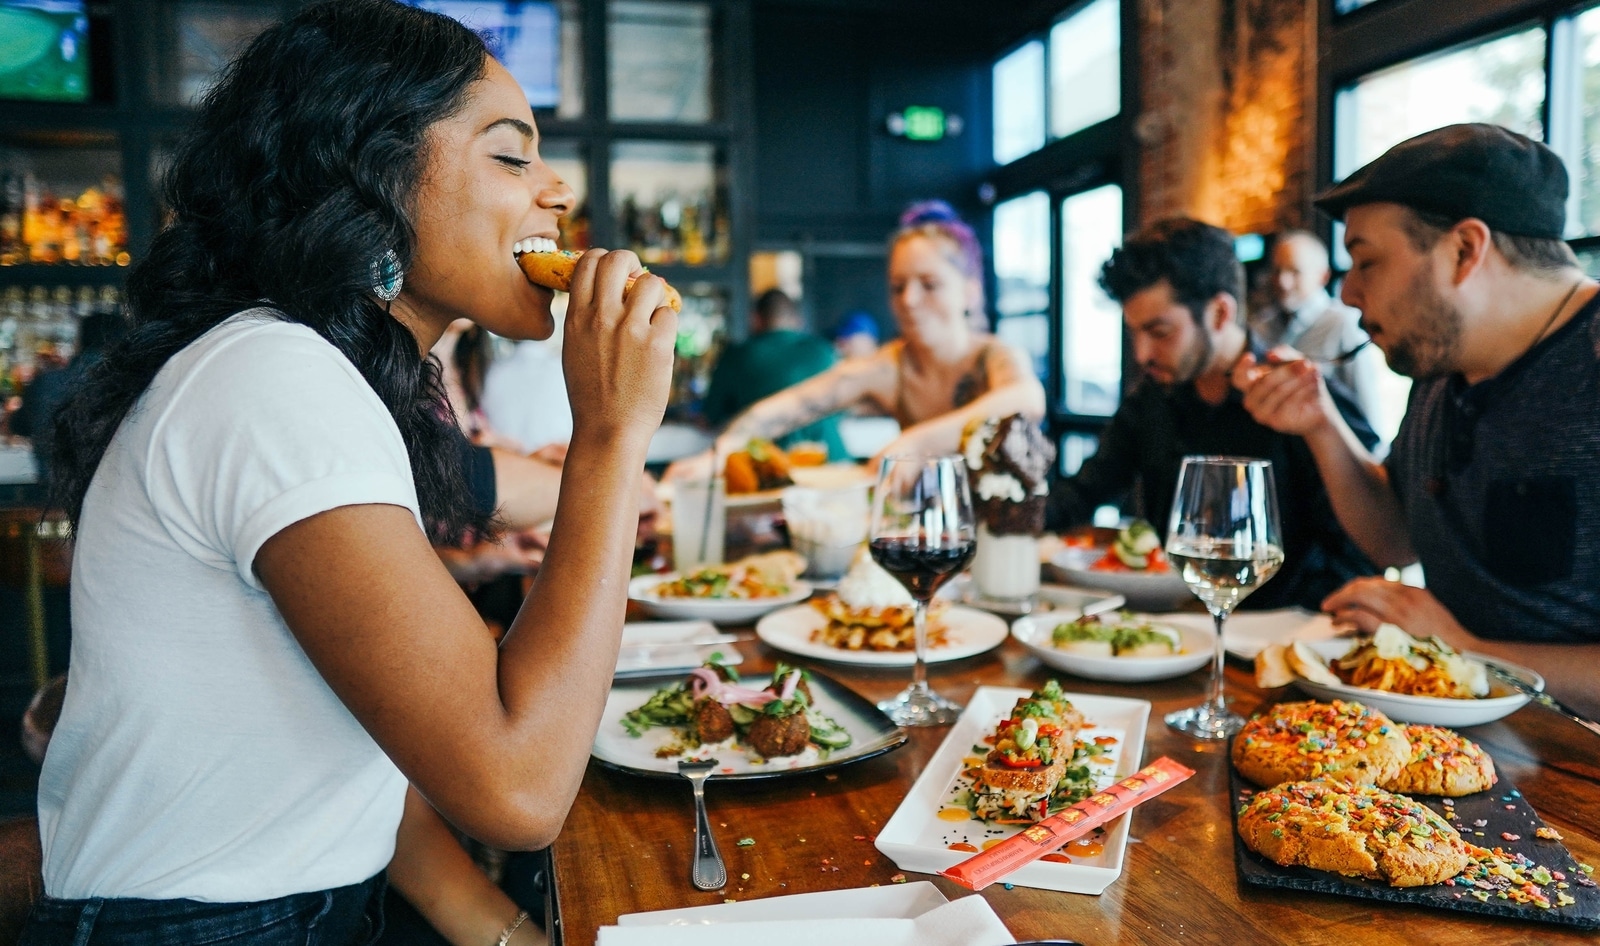 Being a 'Social Omnivore' Is Rising In Popularity—Is This a Good or Bad Thing?&nbsp;